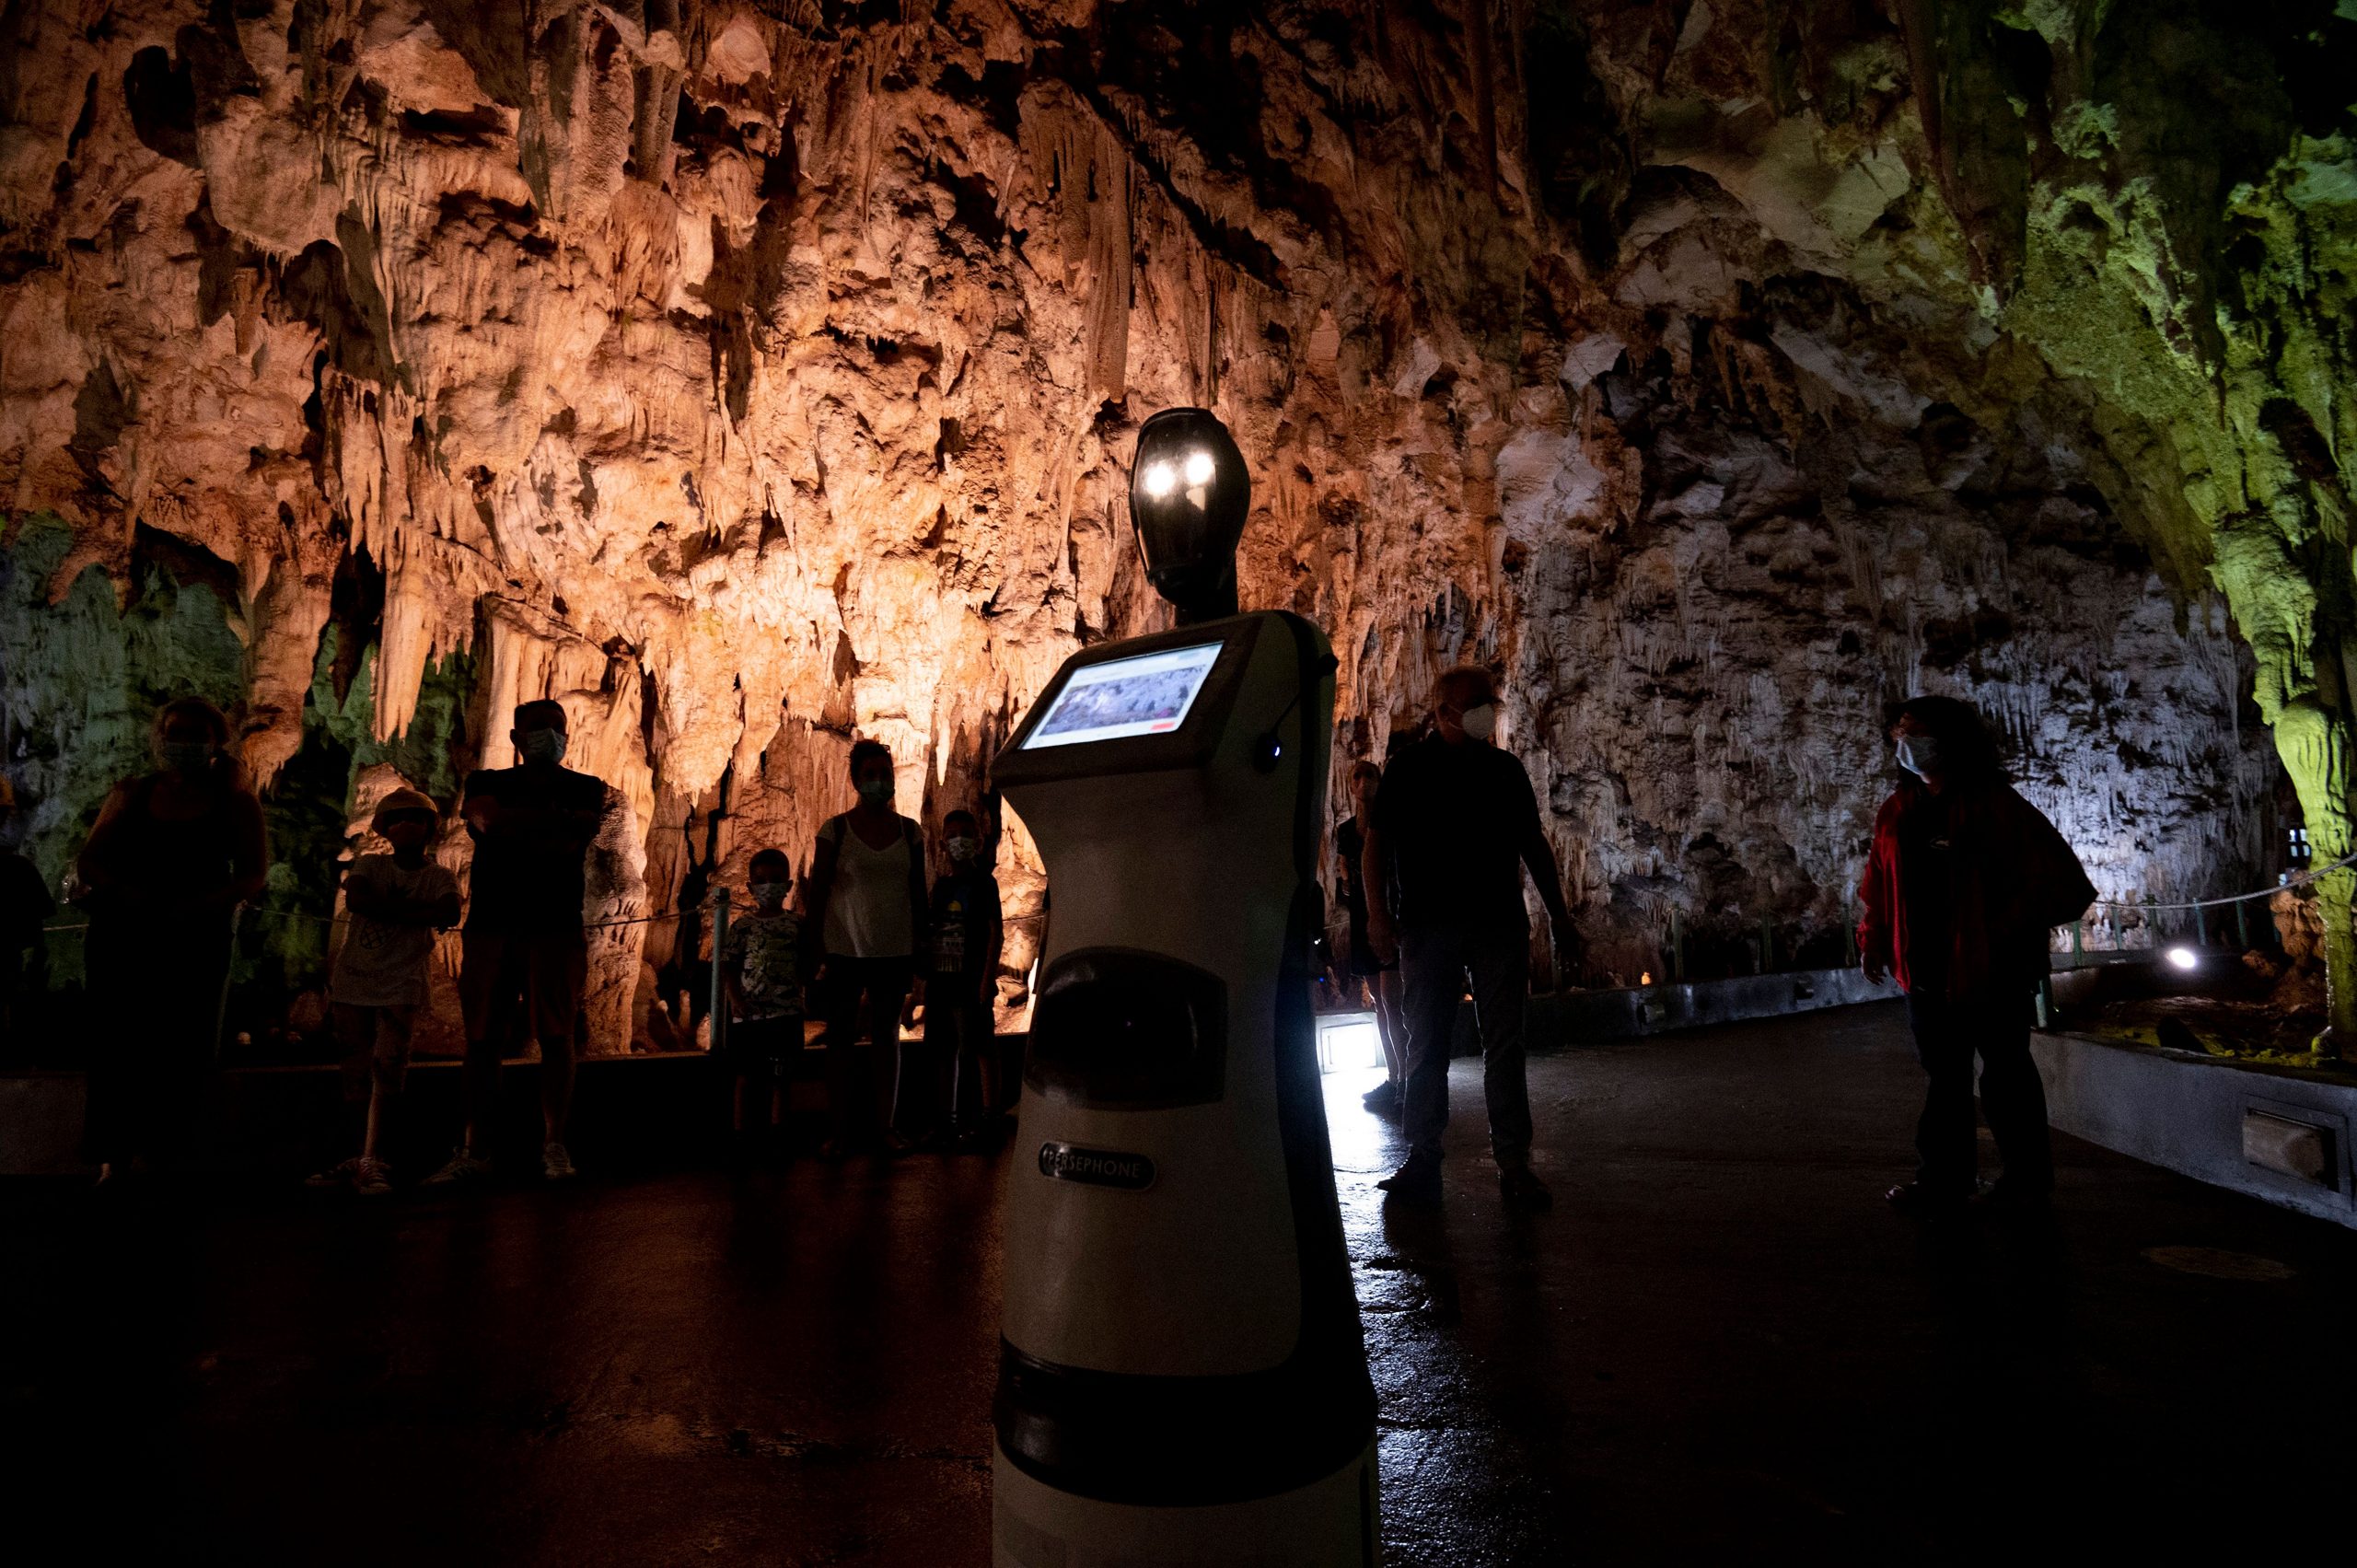 Persephone, the robot guide, leads visitors in a Greek cave